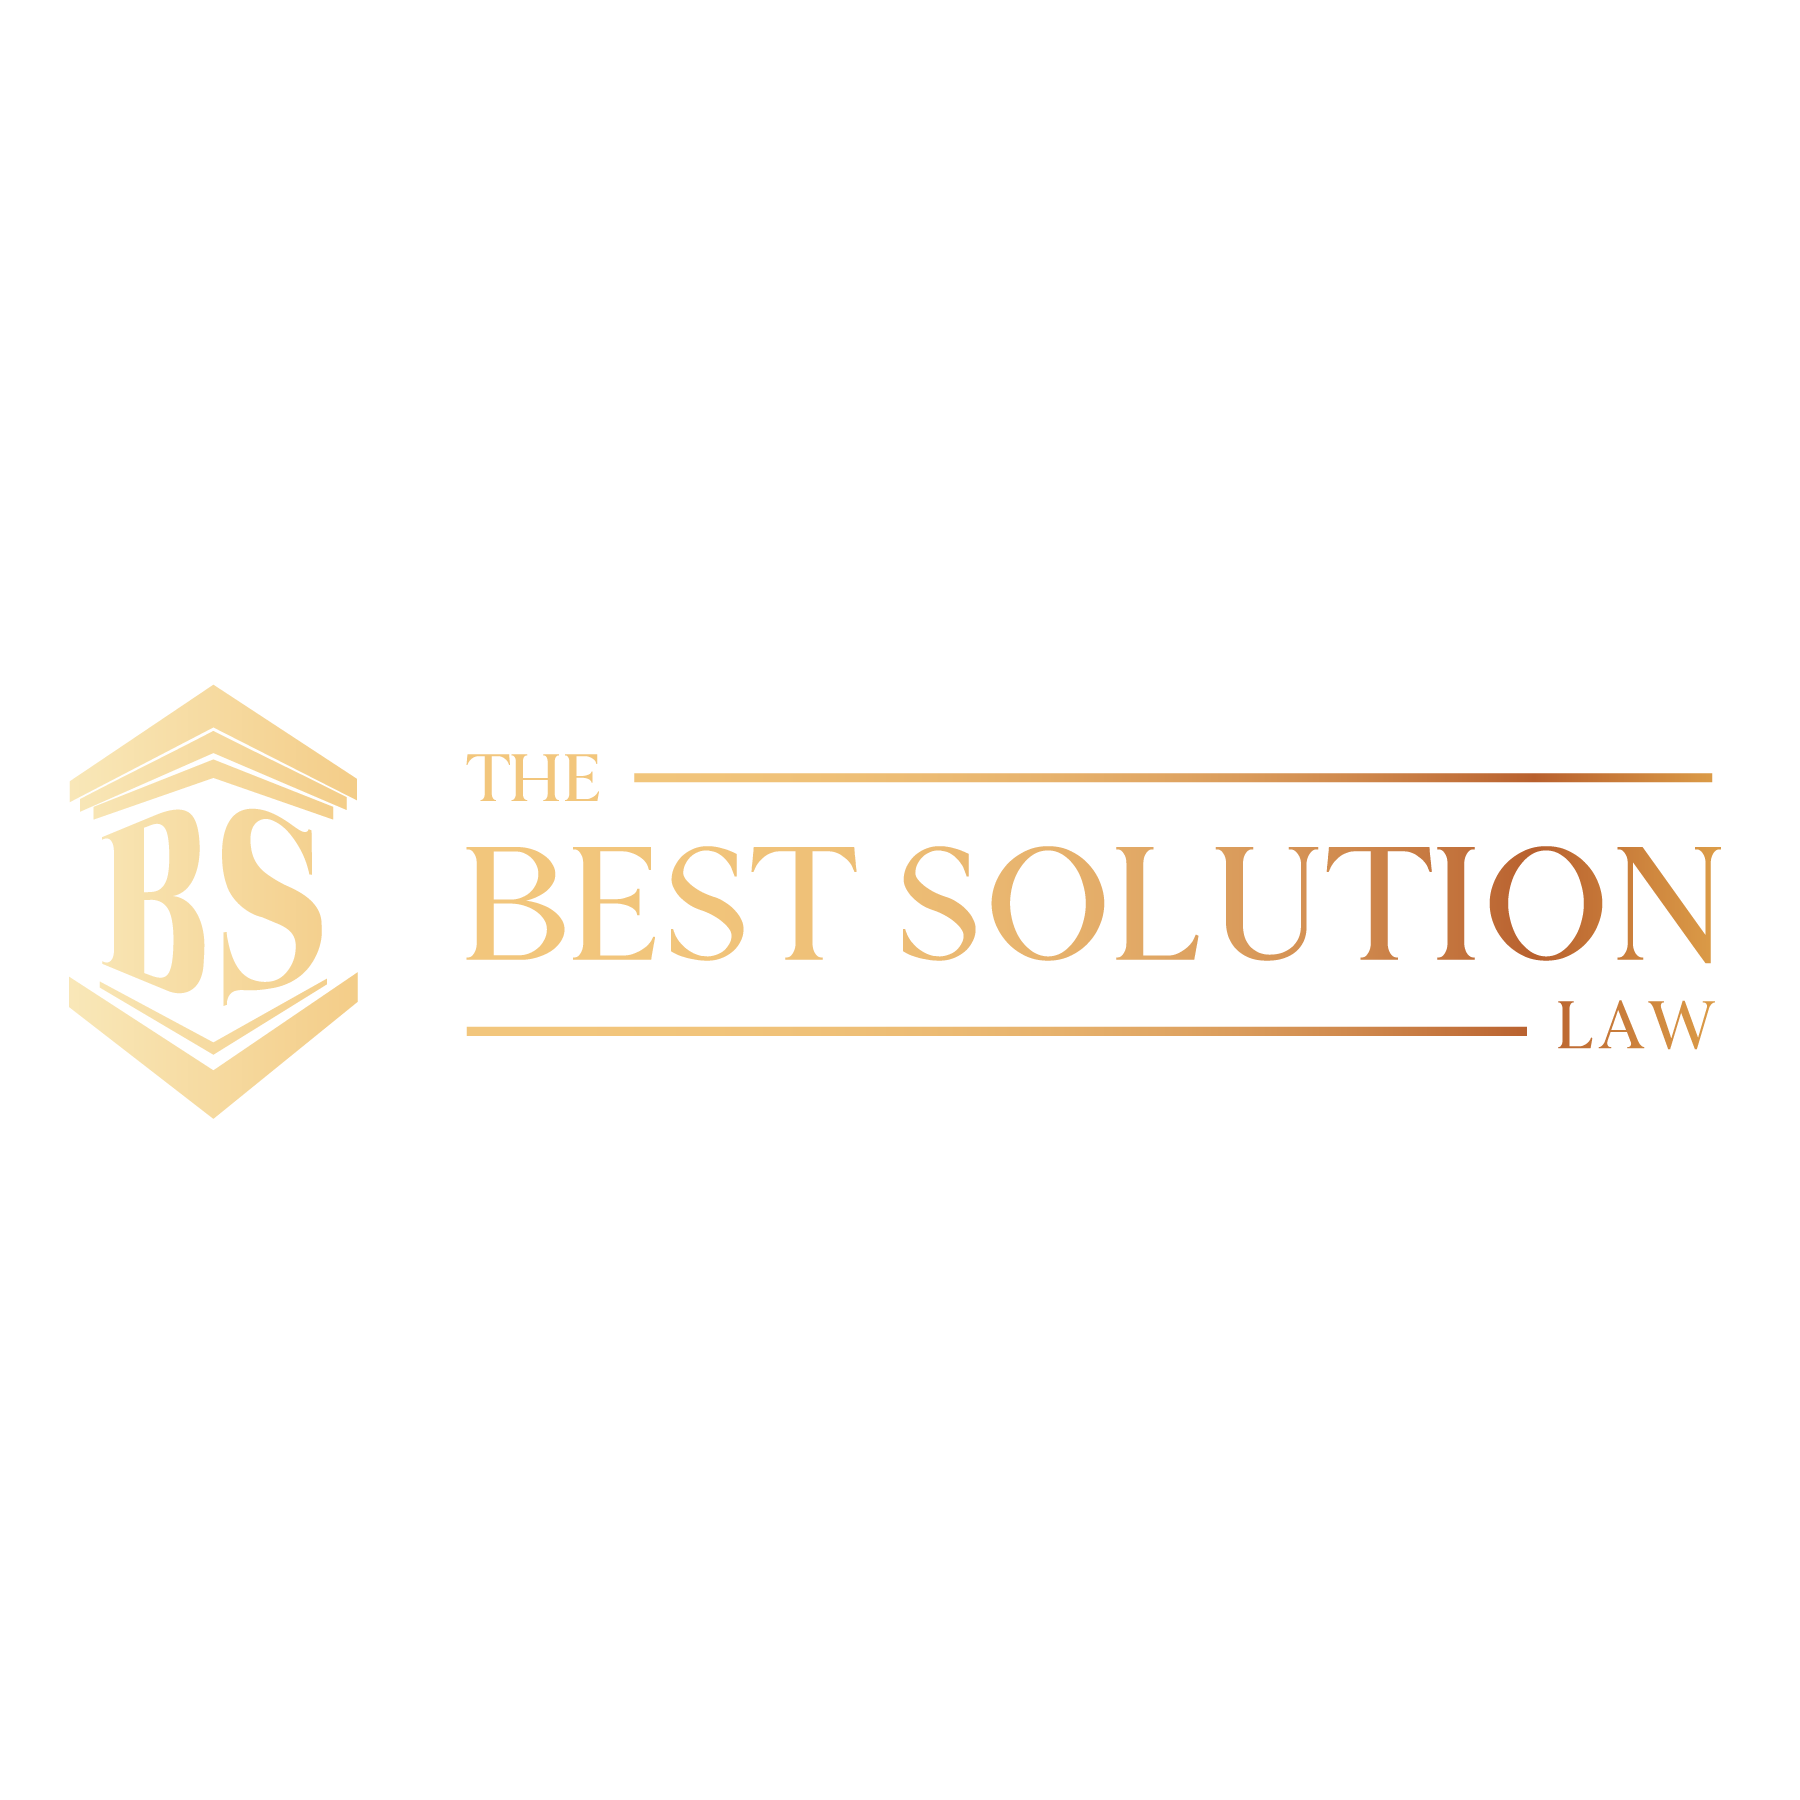 Logo Công ty Luật TNHH The Best Solution